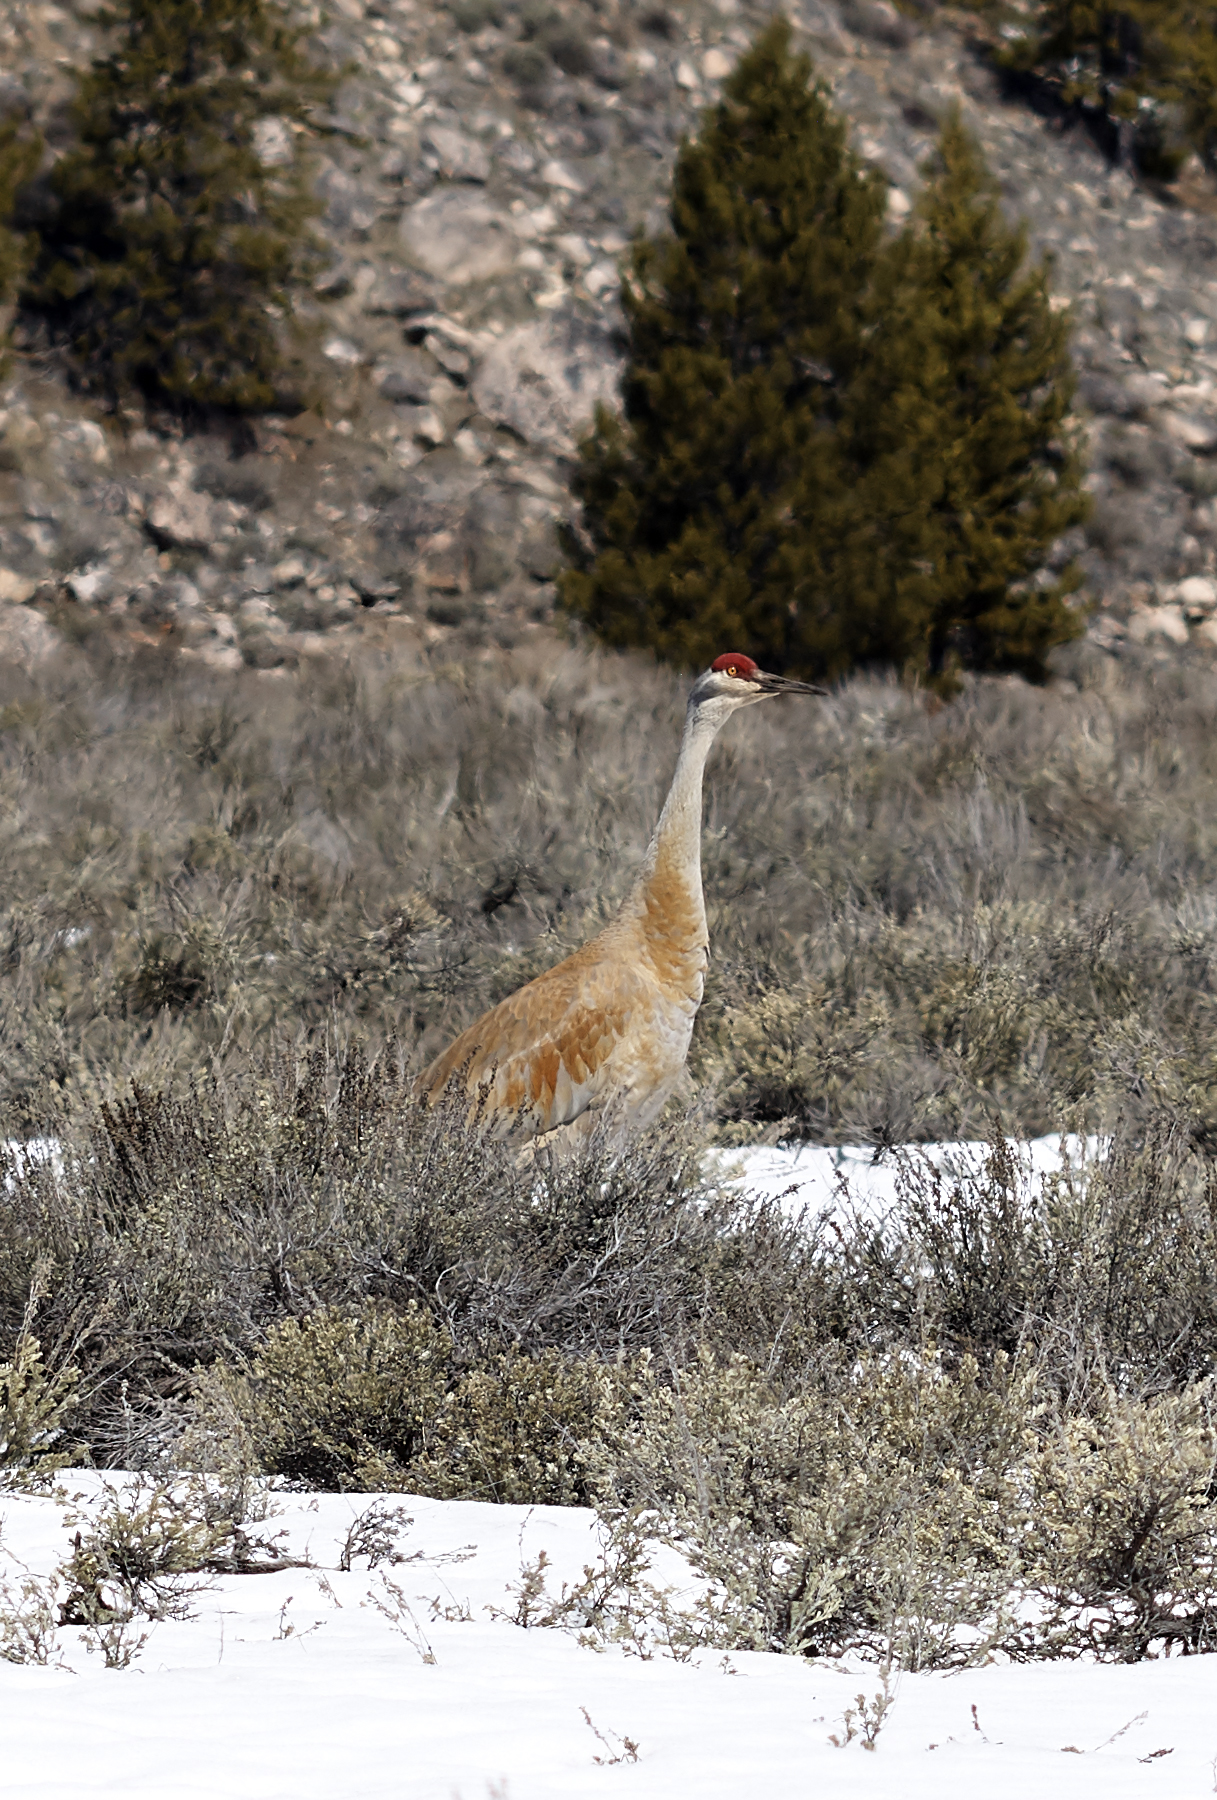 North American Sand Crane in the Sawtooth Mountains Spring 2020